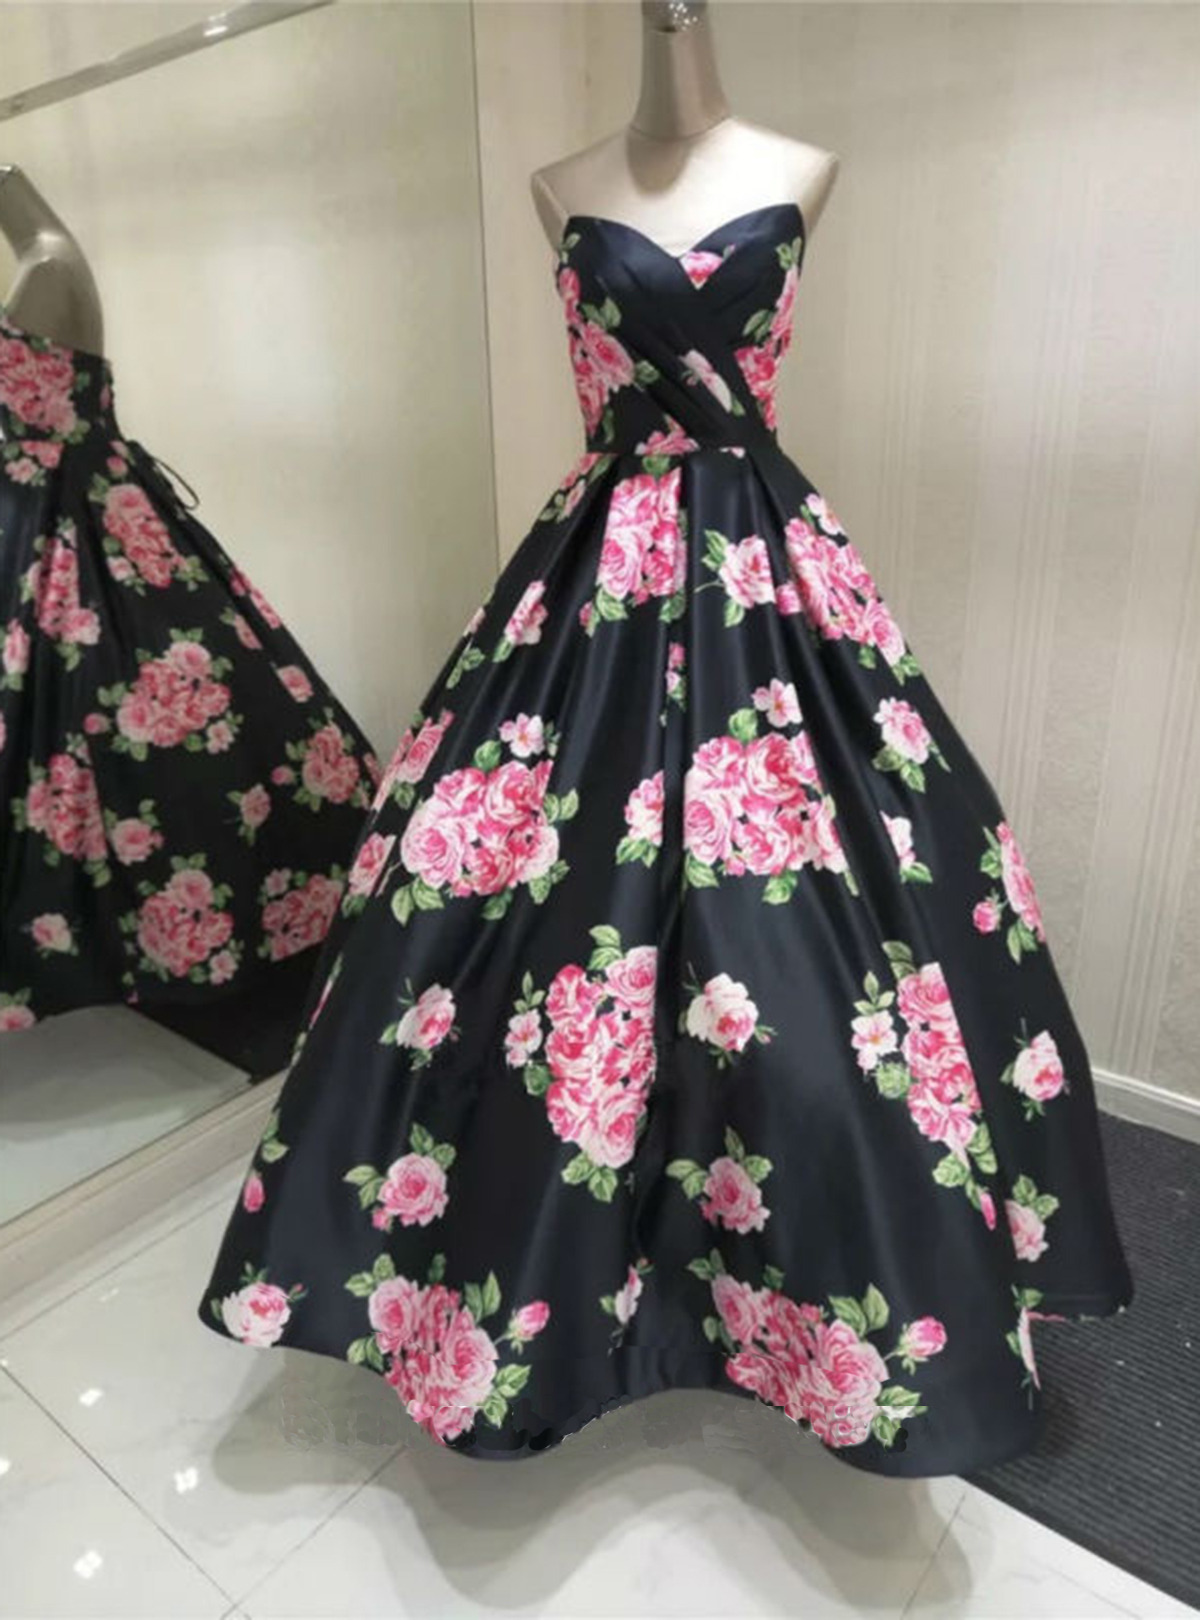 Prom Dresses collection — Beautiful black foral satin prom dress